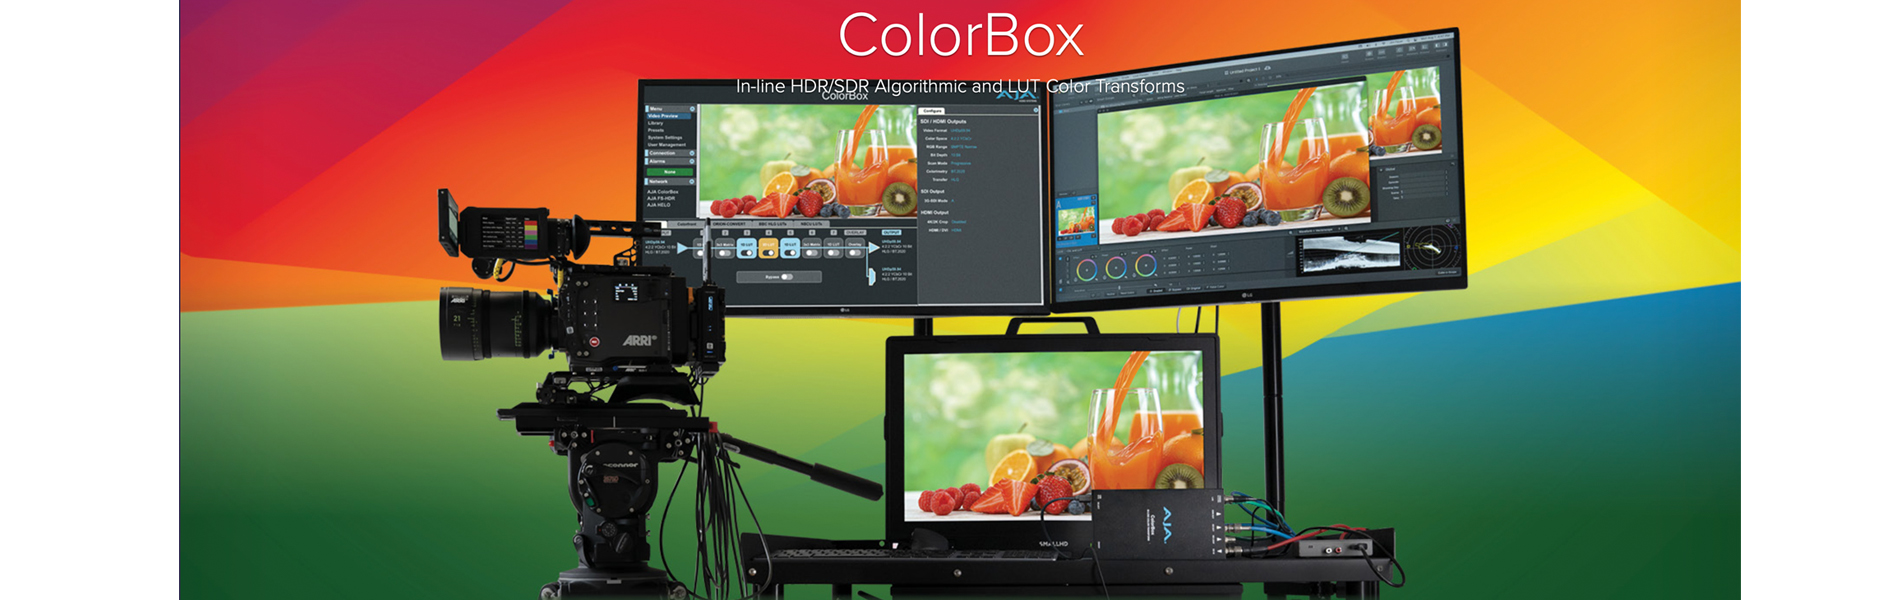 ColorBox From AJA: Increasing Colour Accuracy Across The Board